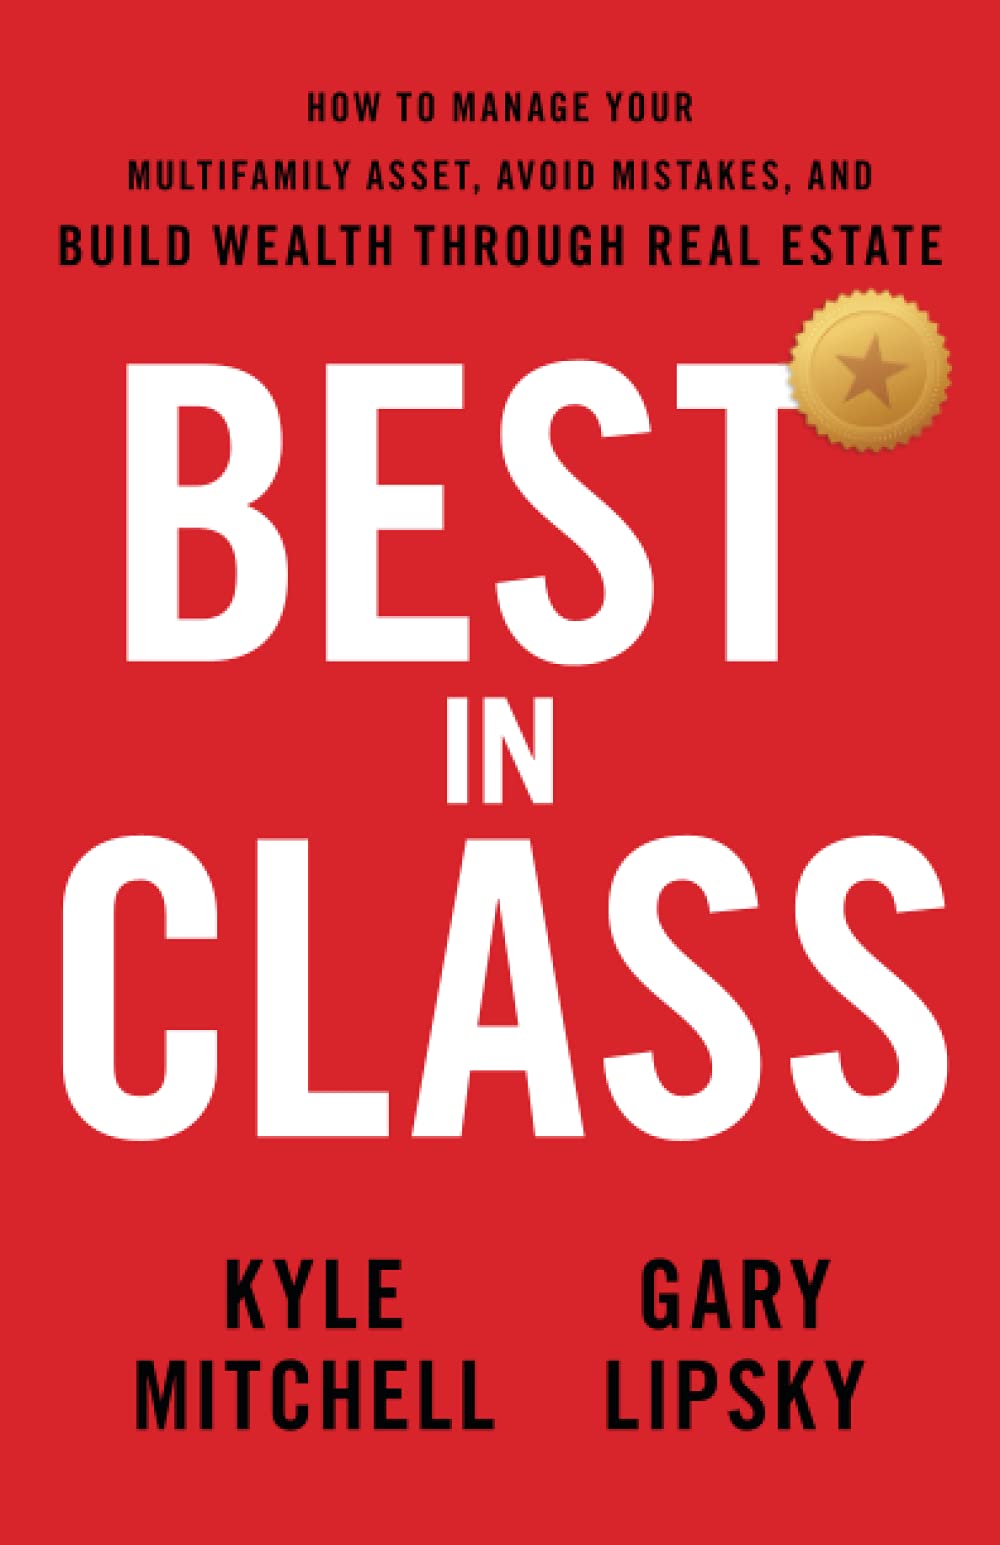 Best In Class How to Manage Your Multifamily Asset, Avoid Mistakes, and Build Wealth Through Real Estate Kyle Mitchell, Gary Lipsky